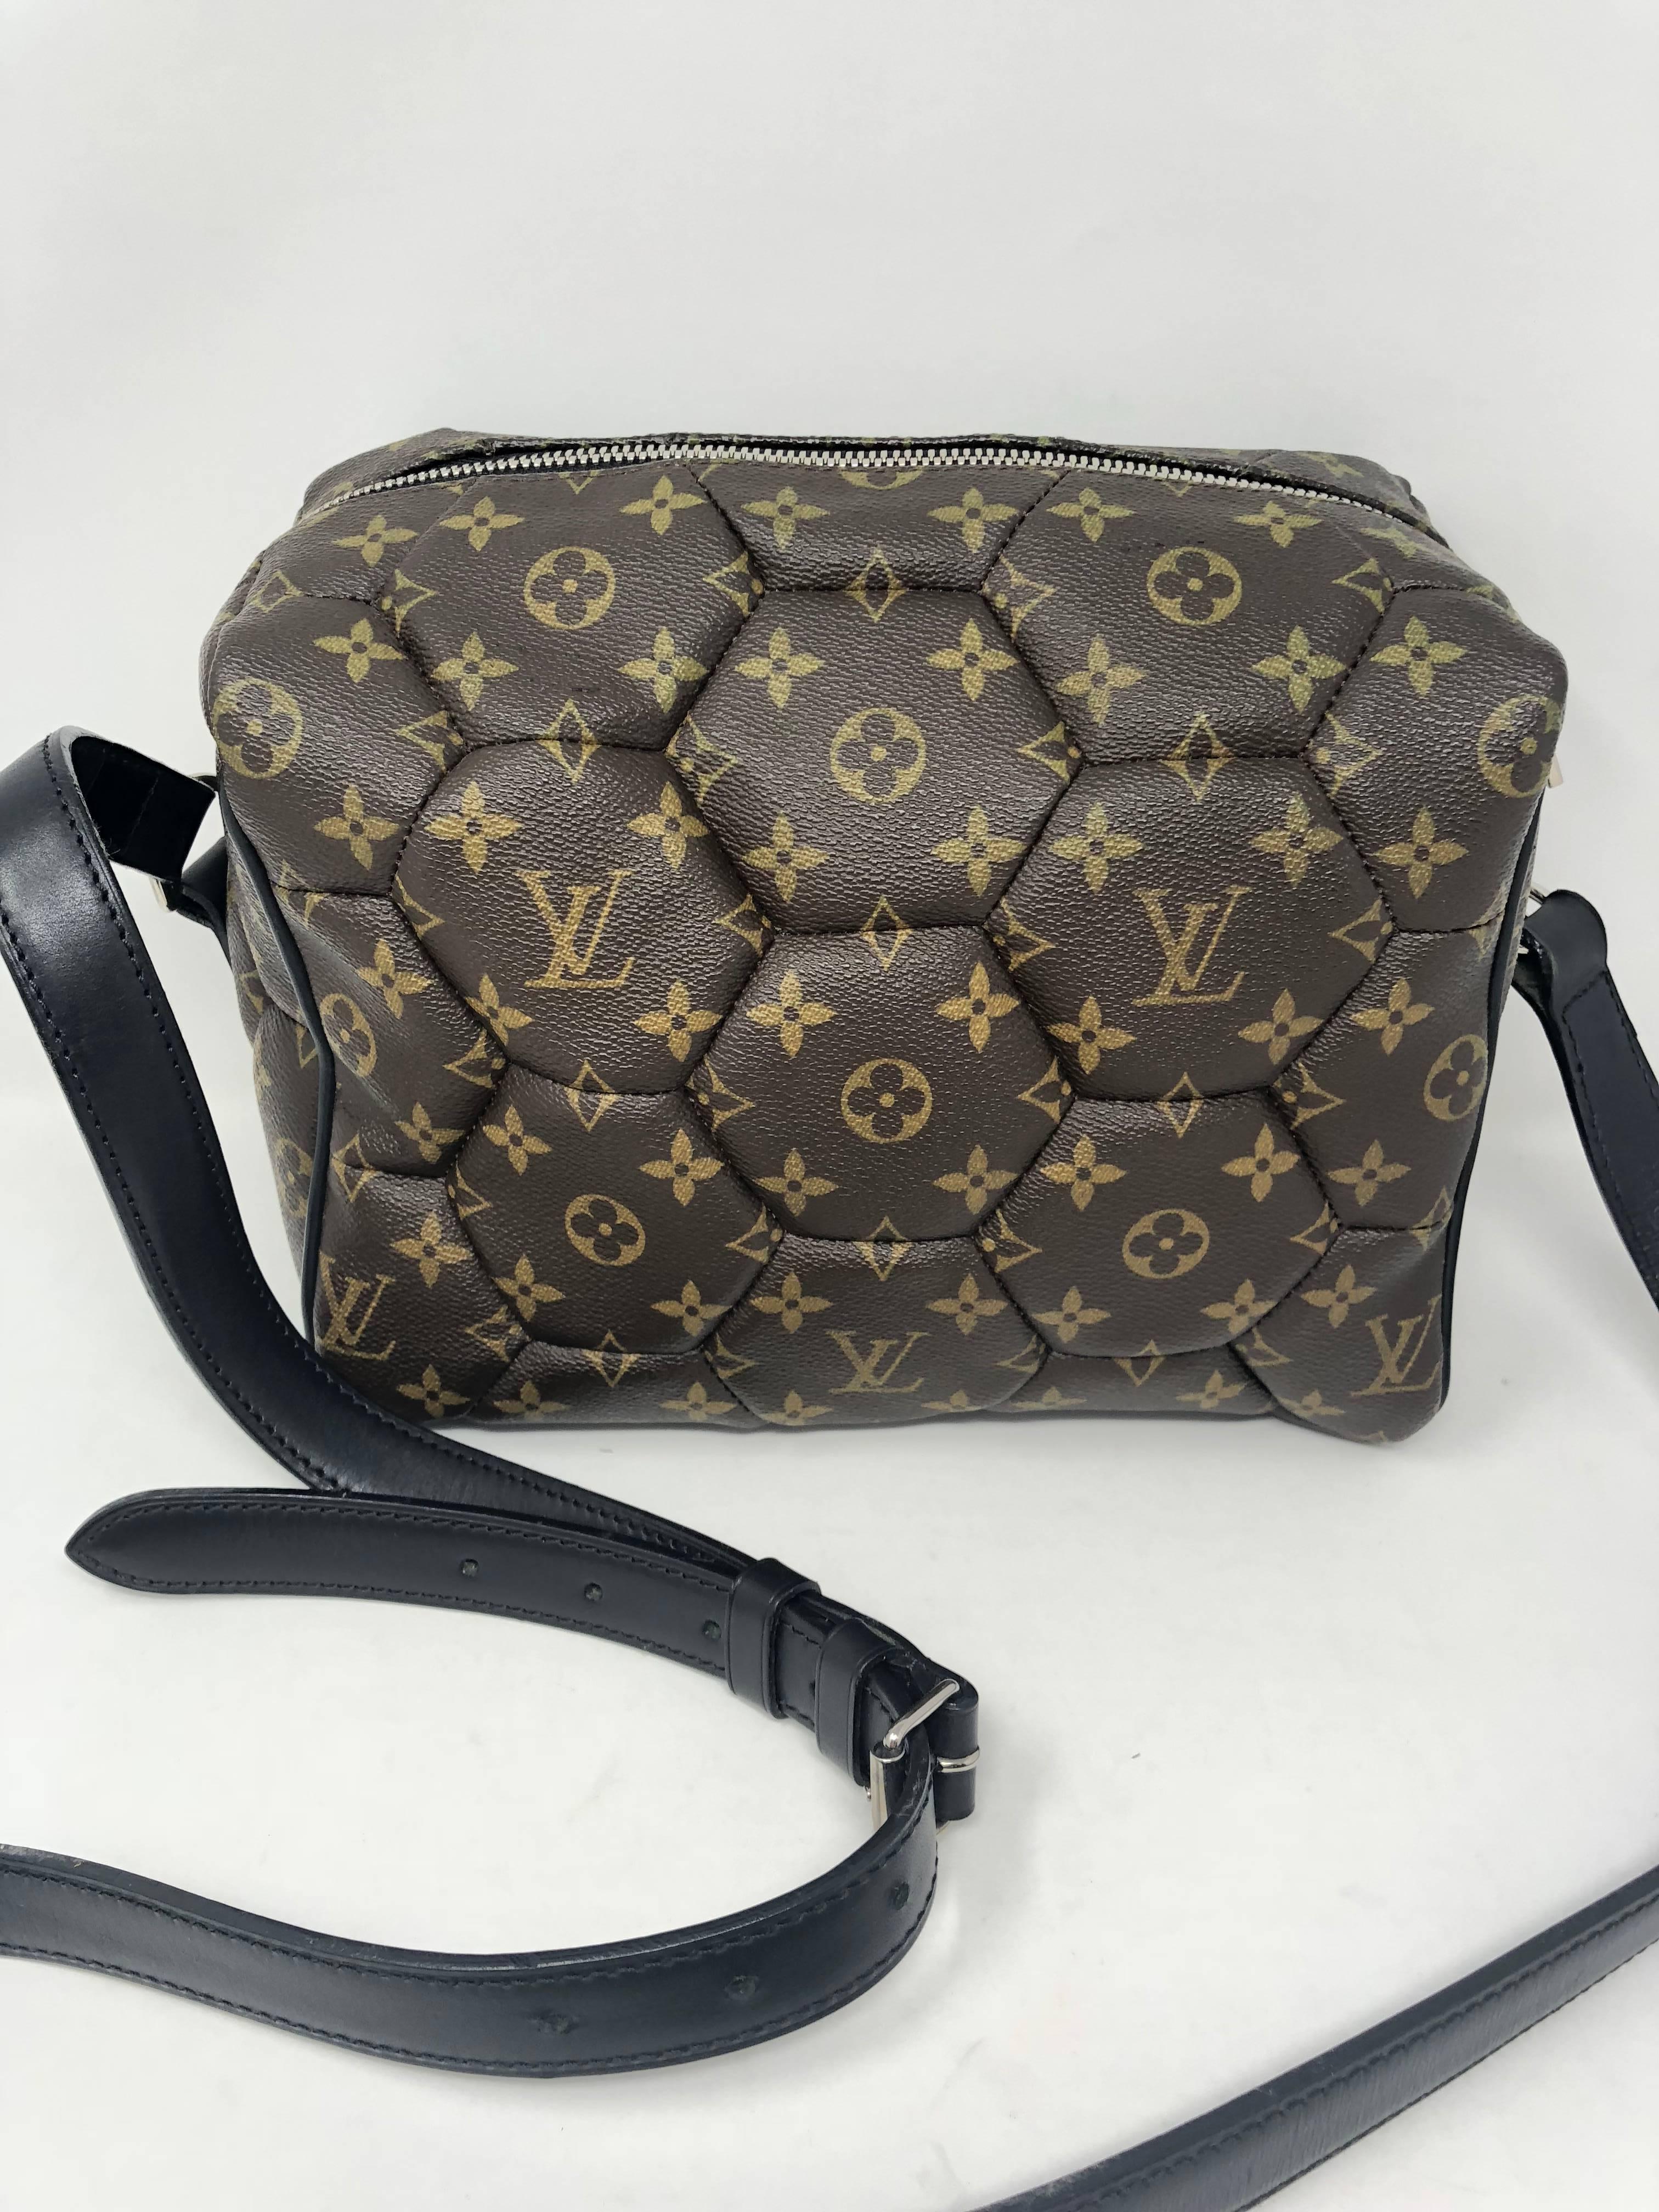 Louis Vuitton Monogram Macassar Hexagon Neo Trocadero Crossbody Bag. Individual pieces handstitched to create soccer ball effect. Rare and limited edition that can be used as luggage or as a messenger bag. All leather interior. From 2009 collection.